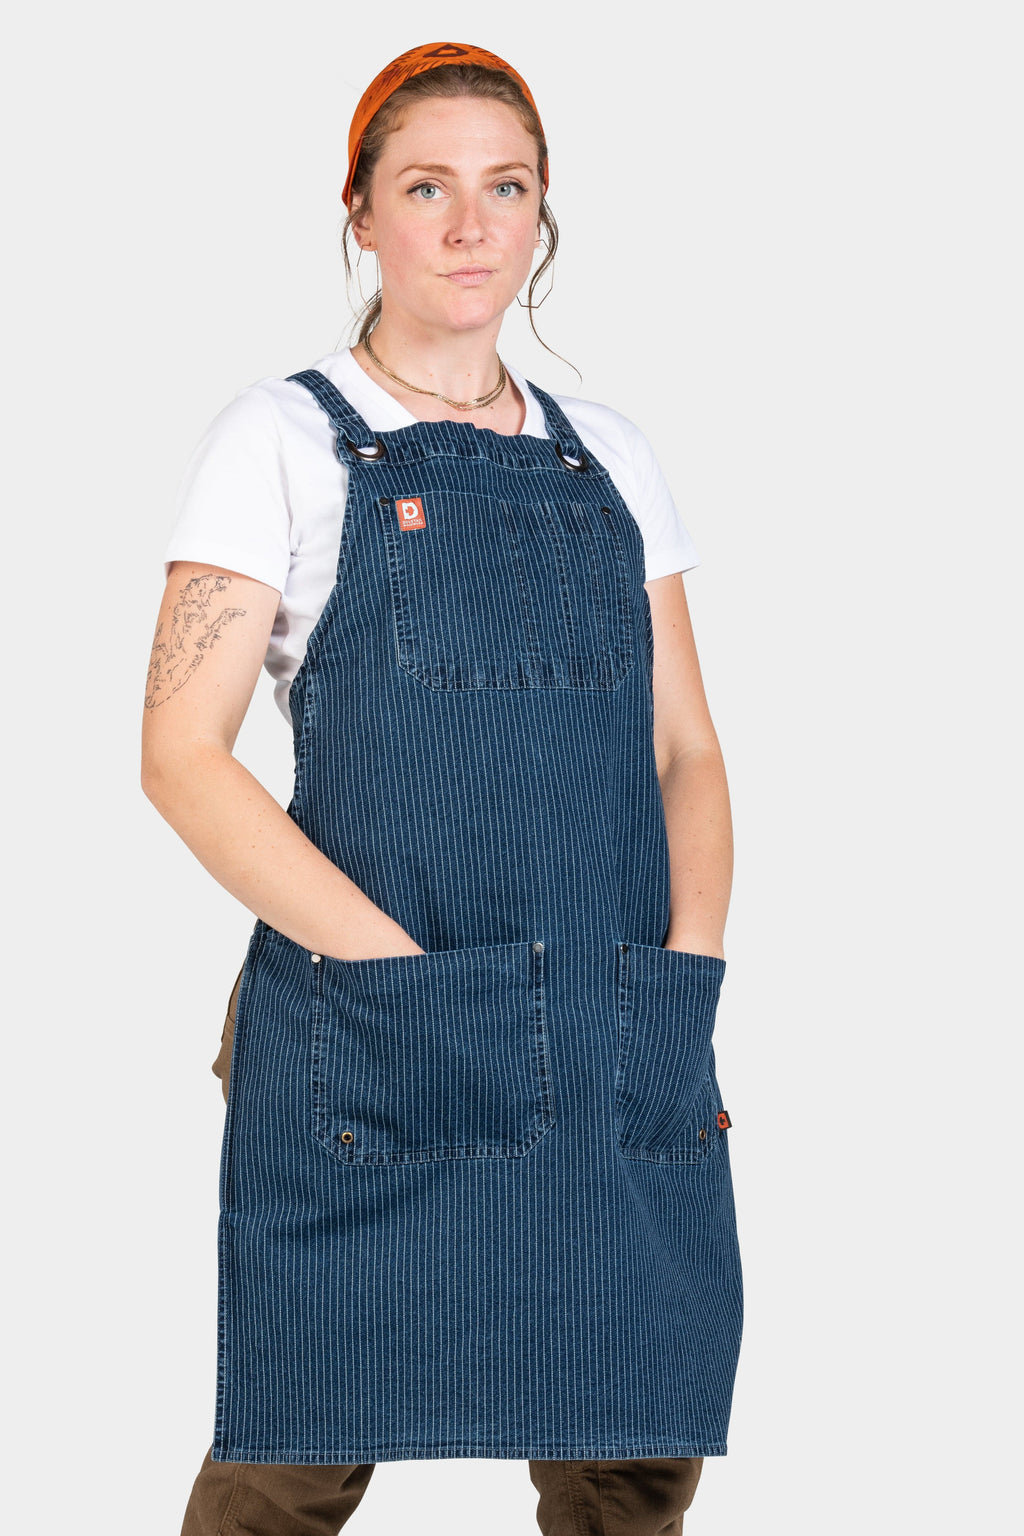 Copy of Obana Work Apron for F23 Accessories Dovetail Workwear